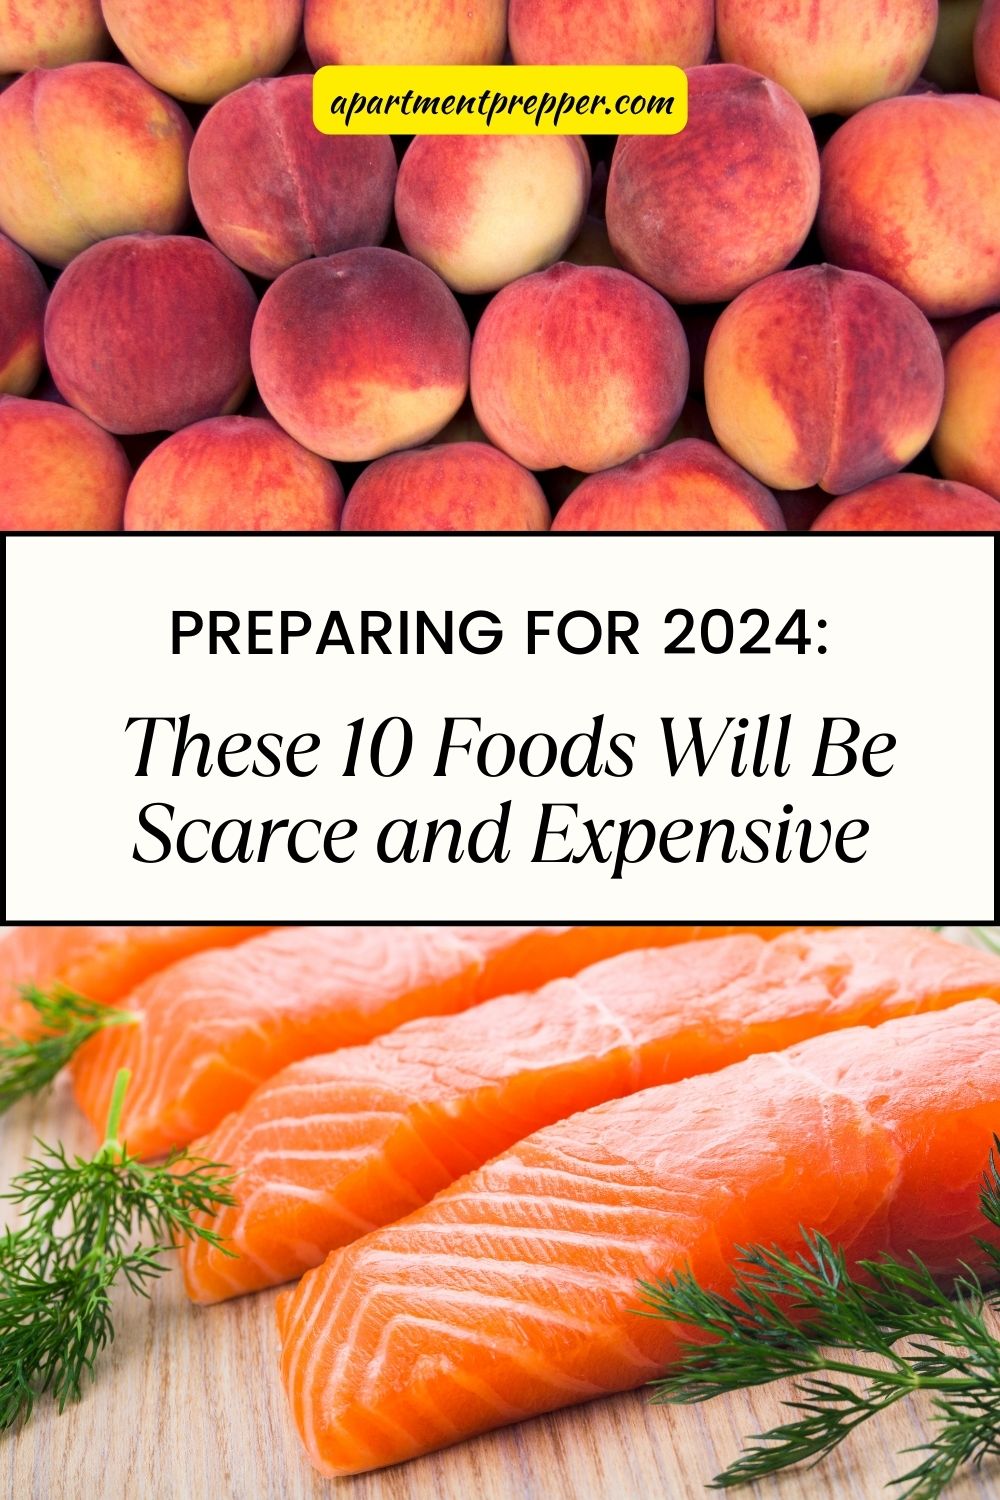 Preparing for 2024 These 10 Foods Will Be Scarce and Expensive